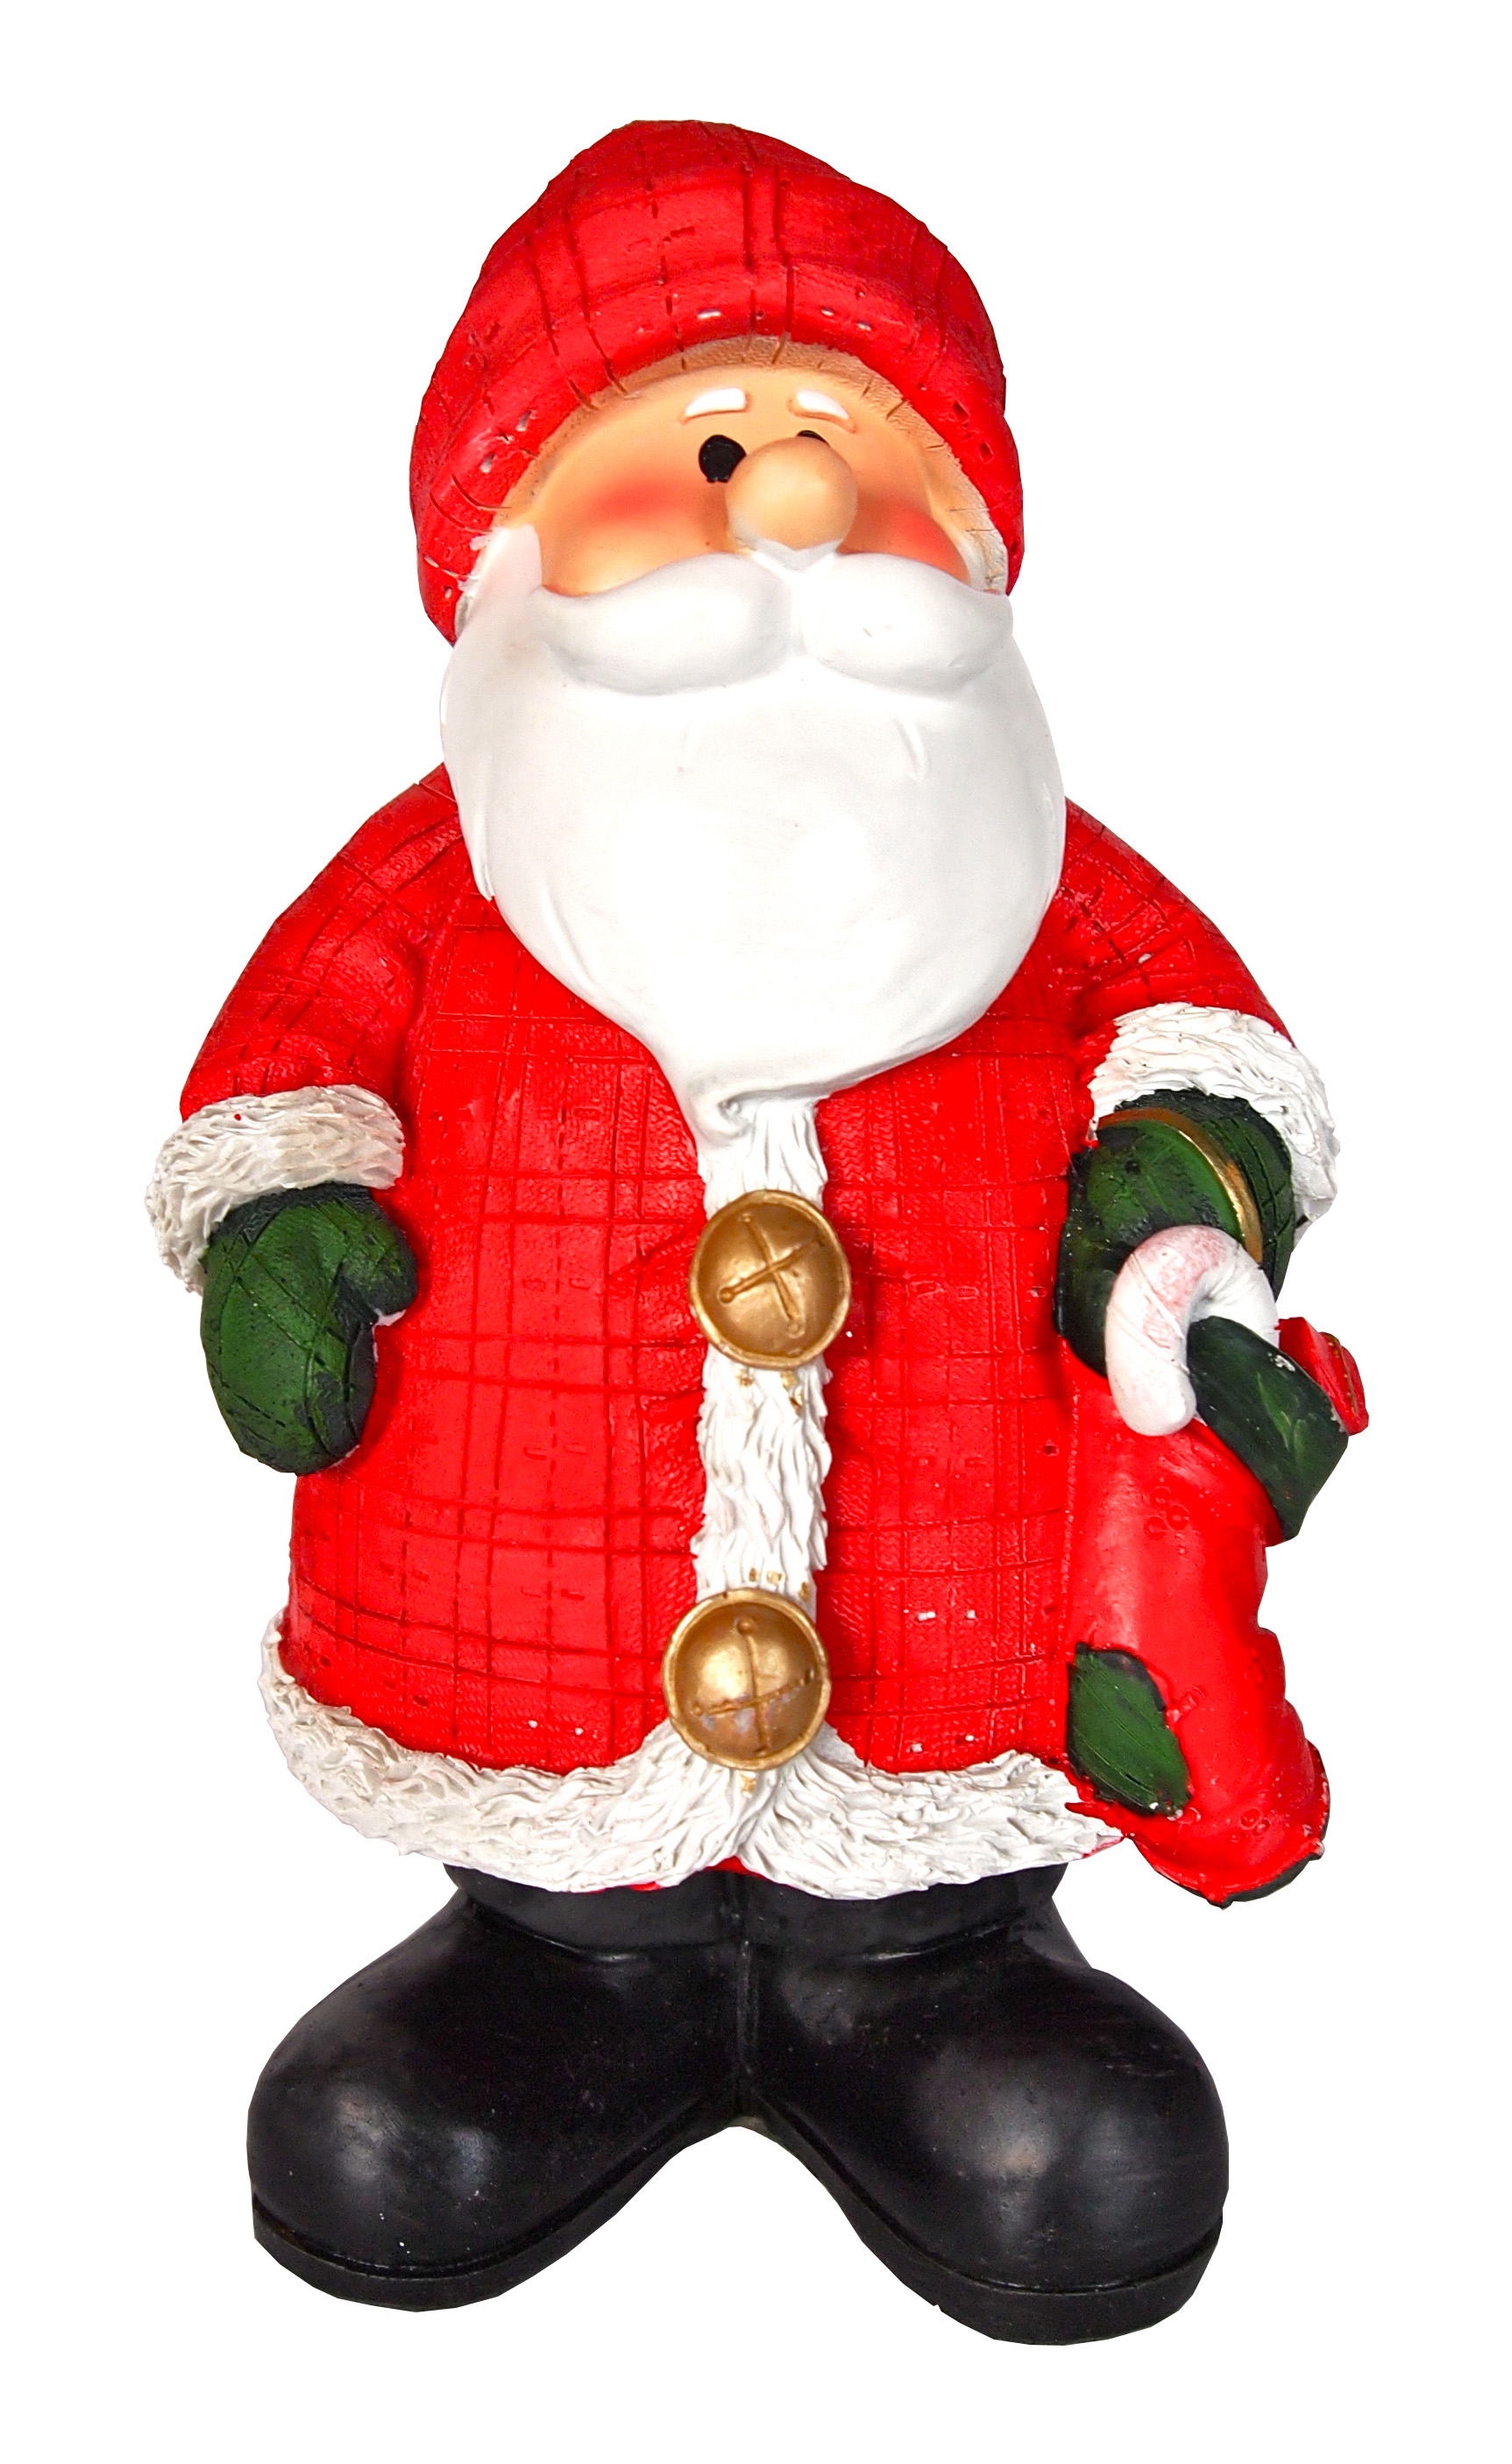 Isolated Christmas Santa Claus Ornament | No cost royalty free stock